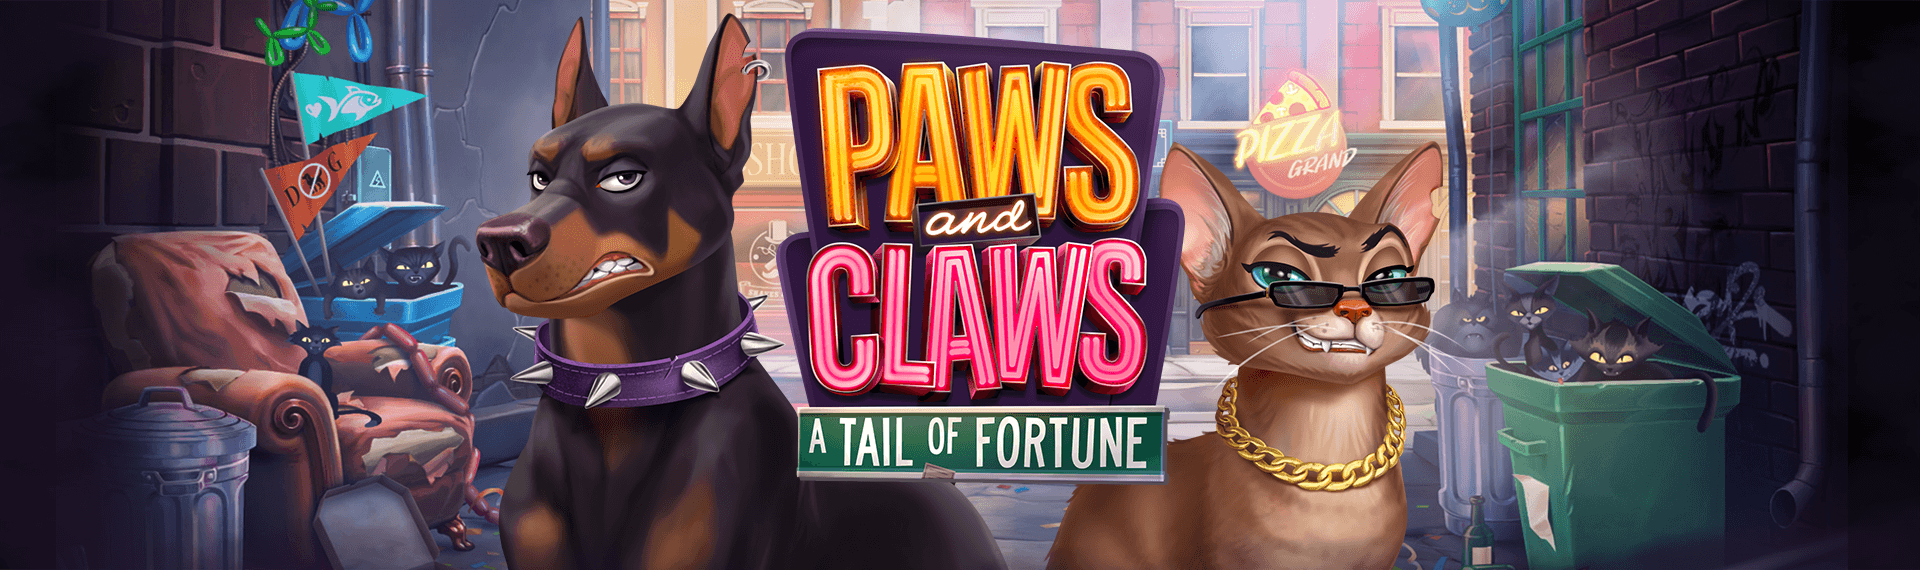 Paws and Claws: A Tail of Fortune Screenshot <br />
<b>Notice</b>:  Undefined variable: key in <b>/var/www/html/wp-content/themes/armadillo/page-game.php</b> on line <b>37</b><br />
1